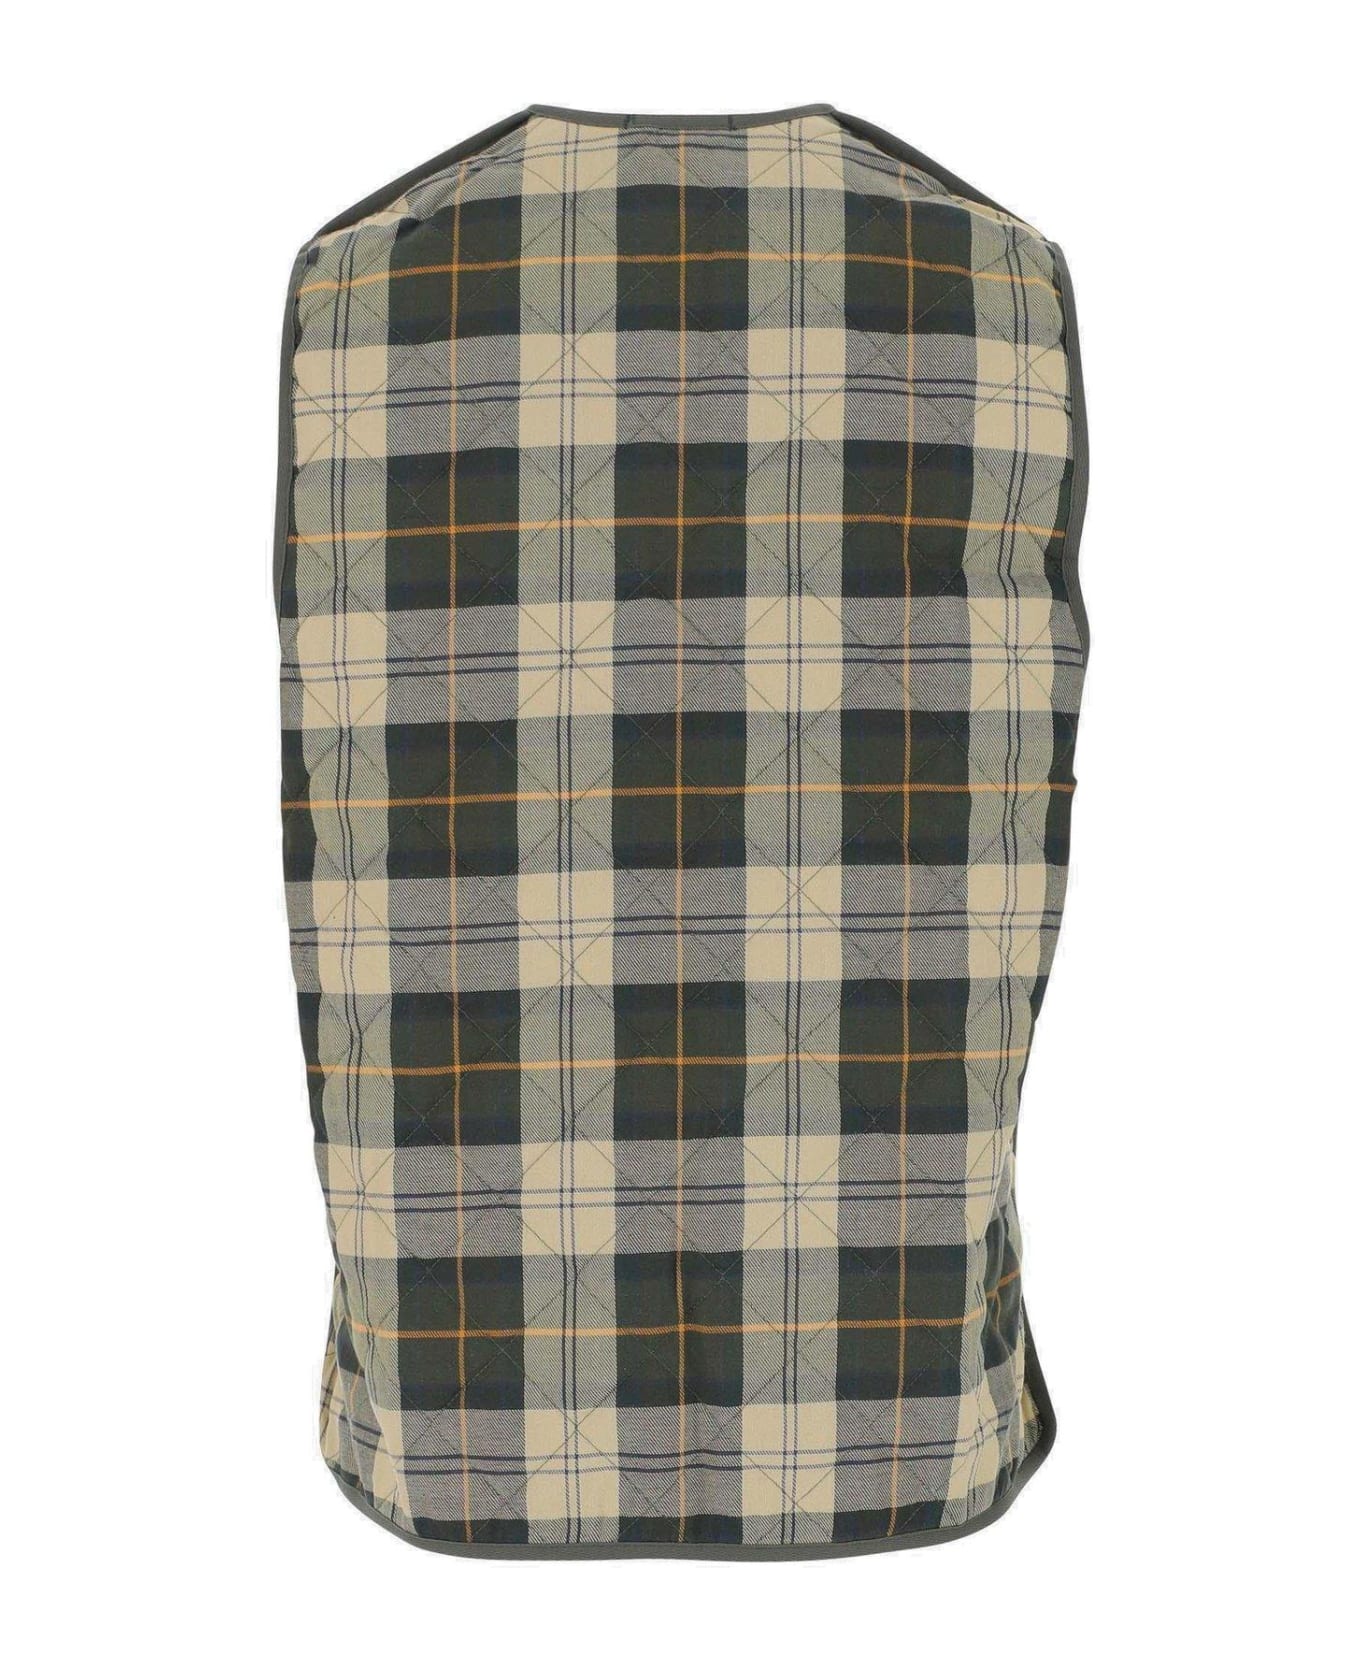 Barbour Reversible Checked Gilet